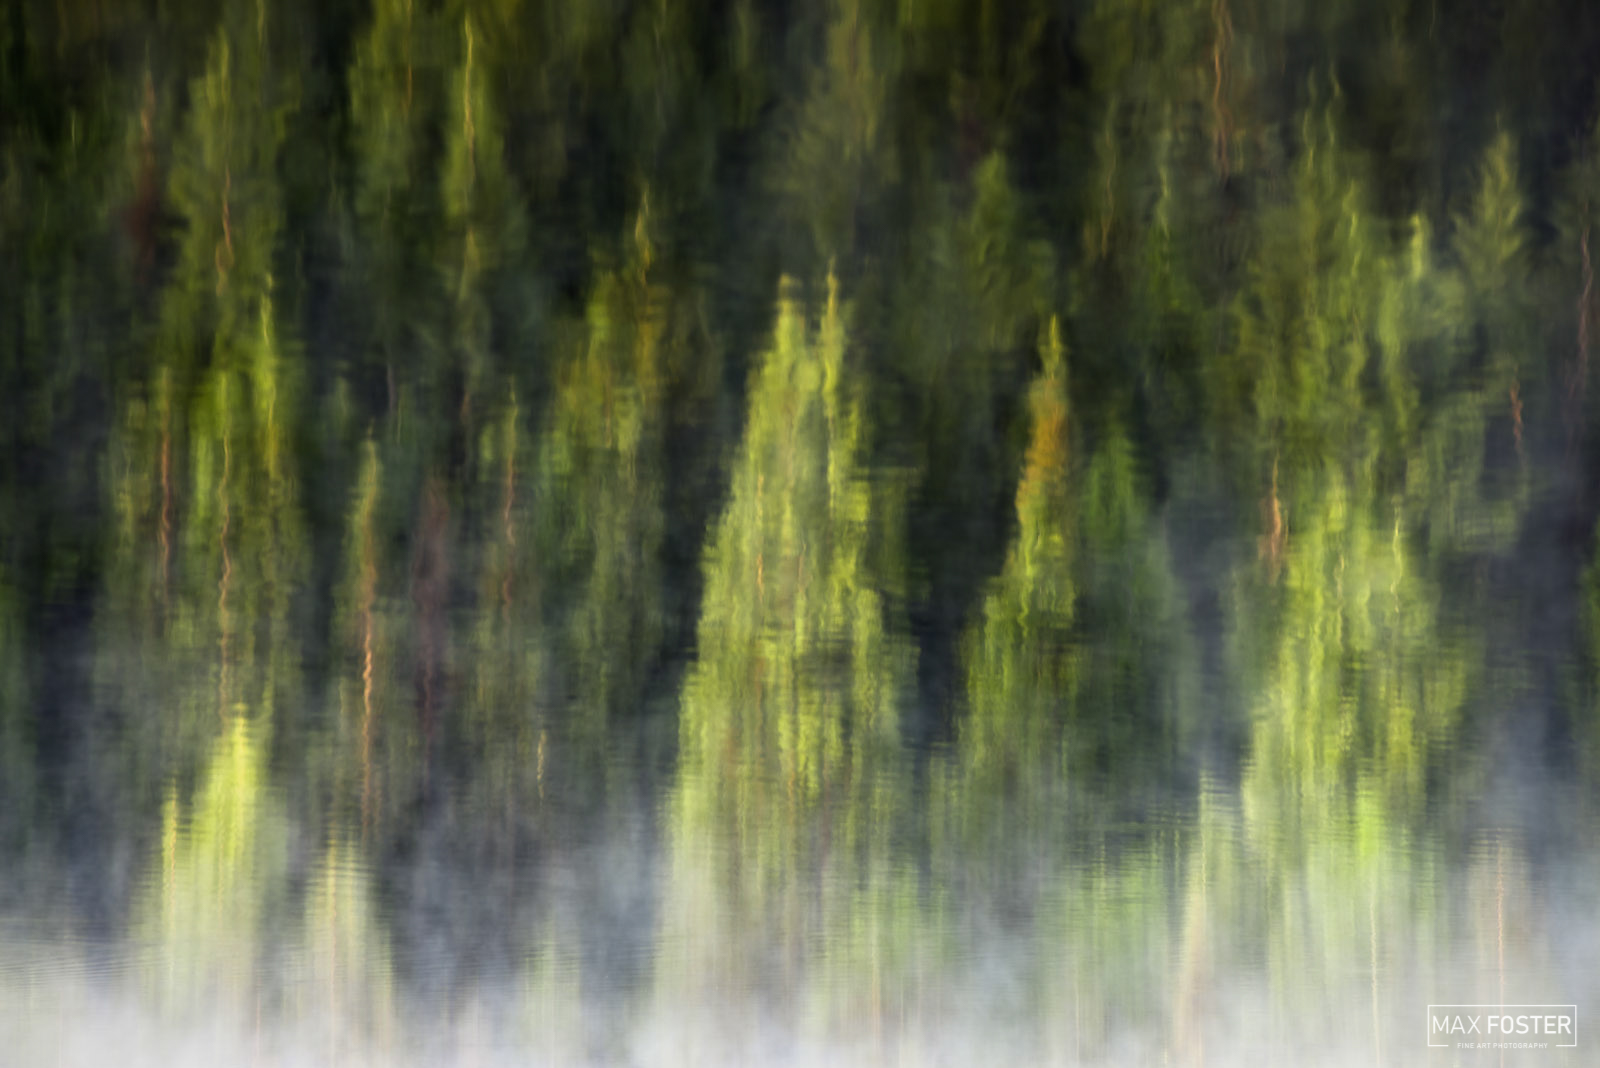 Bring nature into your home with Tranquility, Max Foster's limited edition photography print of evergreen trees reflecting in...